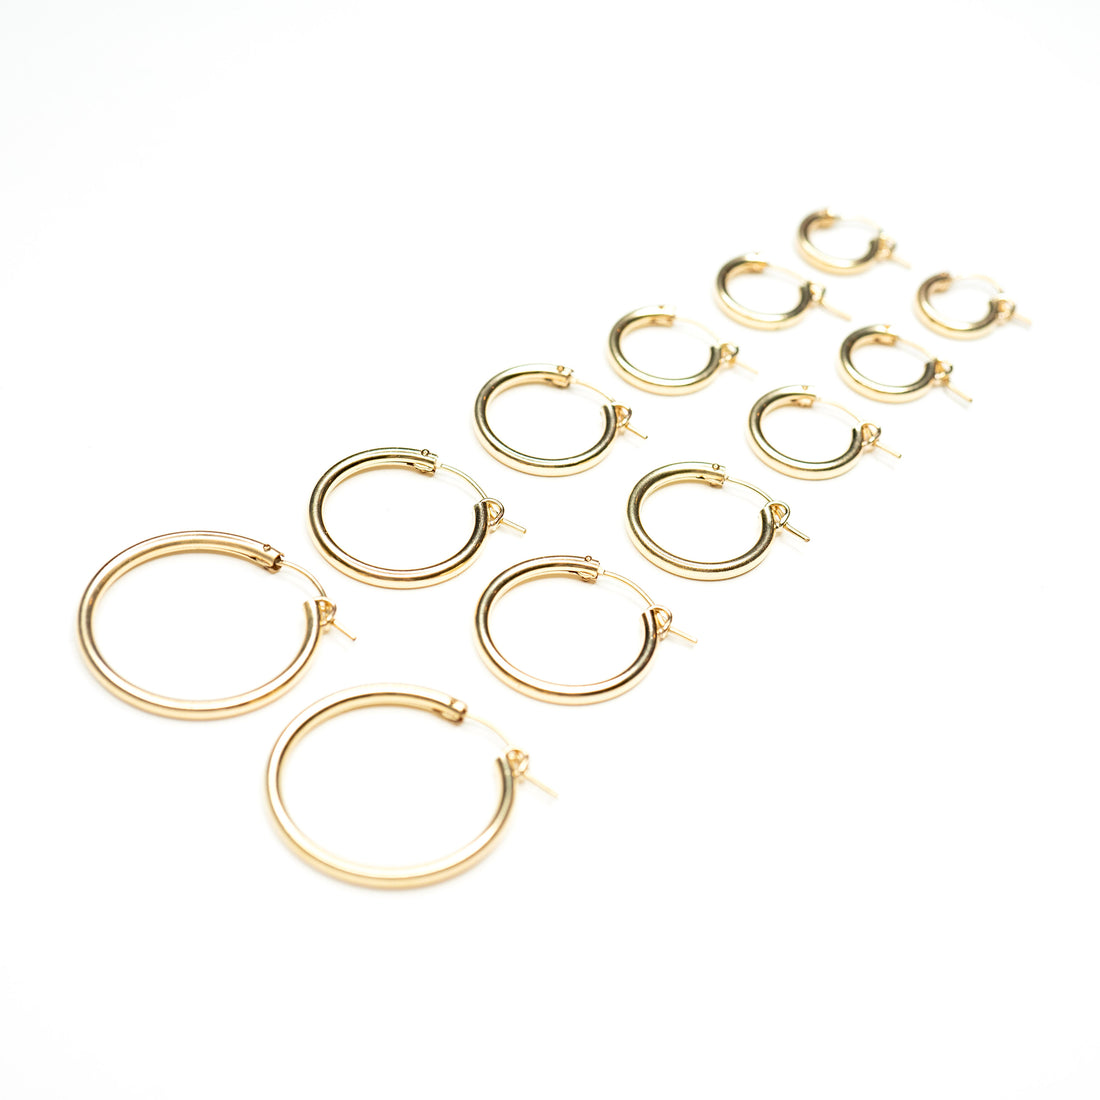 14k Gold filled Clasp Hoops, Gold Hoops, Lightweight Hoops, Clasp Hoops, Gold Filled Hoops, 14k Gold Hoops, Simple earrings, Classic Hoops